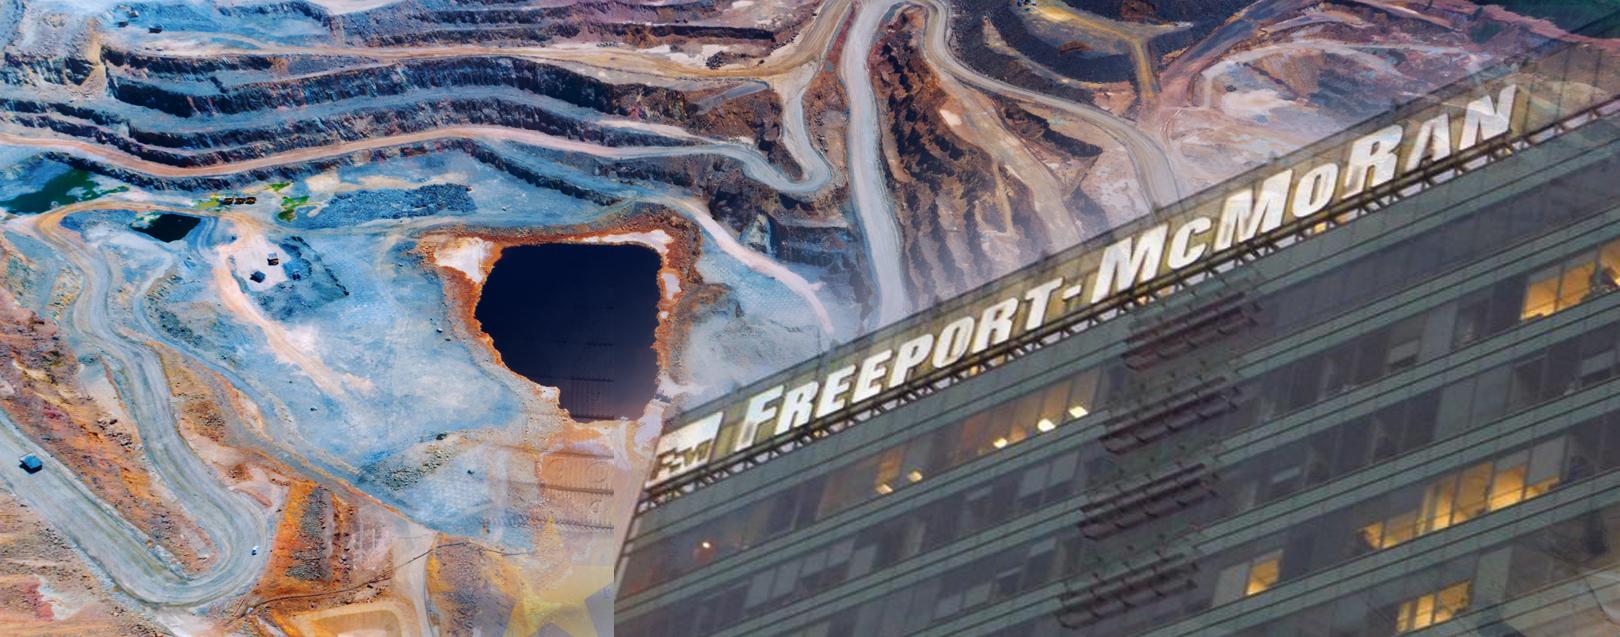 Indonesia and Freeport reach an agreement on new mining permit